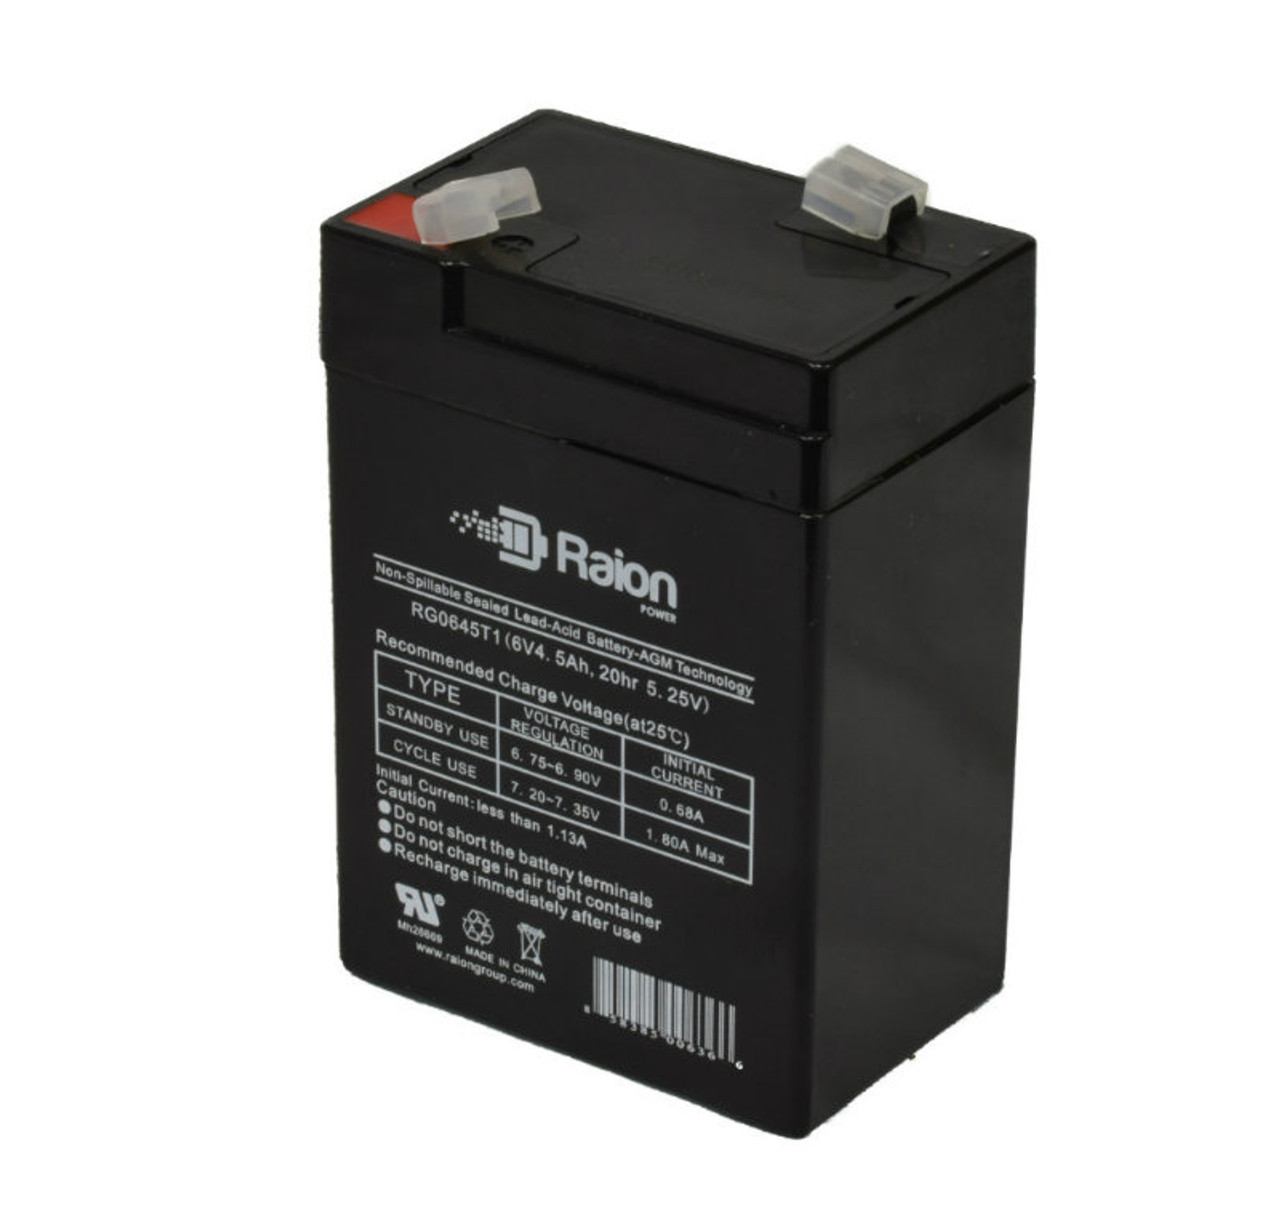 Raion Power RG0645T1 6V 4.5Ah Replacement Battery Cartridge for Peg Perego 6V Energy Cube Type C